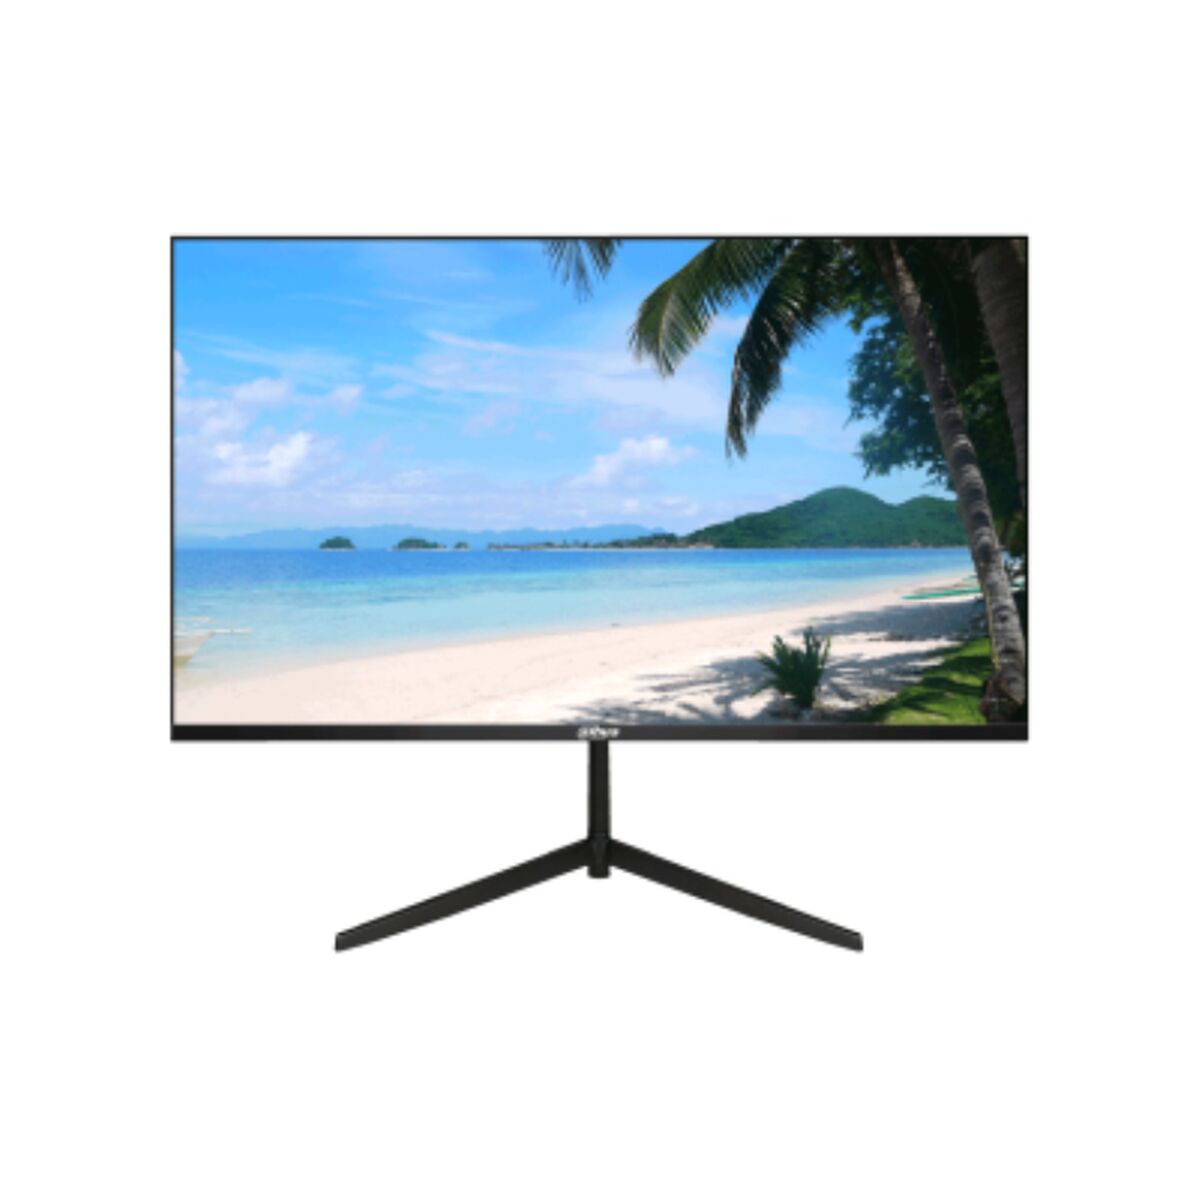 Monitor DAHUA TECHNOLOGY, DAHUA TECHNOLOGY, Computing, monitor-dahua-technology-3, Brand_DAHUA TECHNOLOGY, category-reference-2609, category-reference-2642, category-reference-2644, category-reference-t-19685, category-reference-t-19902, computers / peripherals, Condition_NEW, office, Price_50 - 100, Teleworking, RiotNook